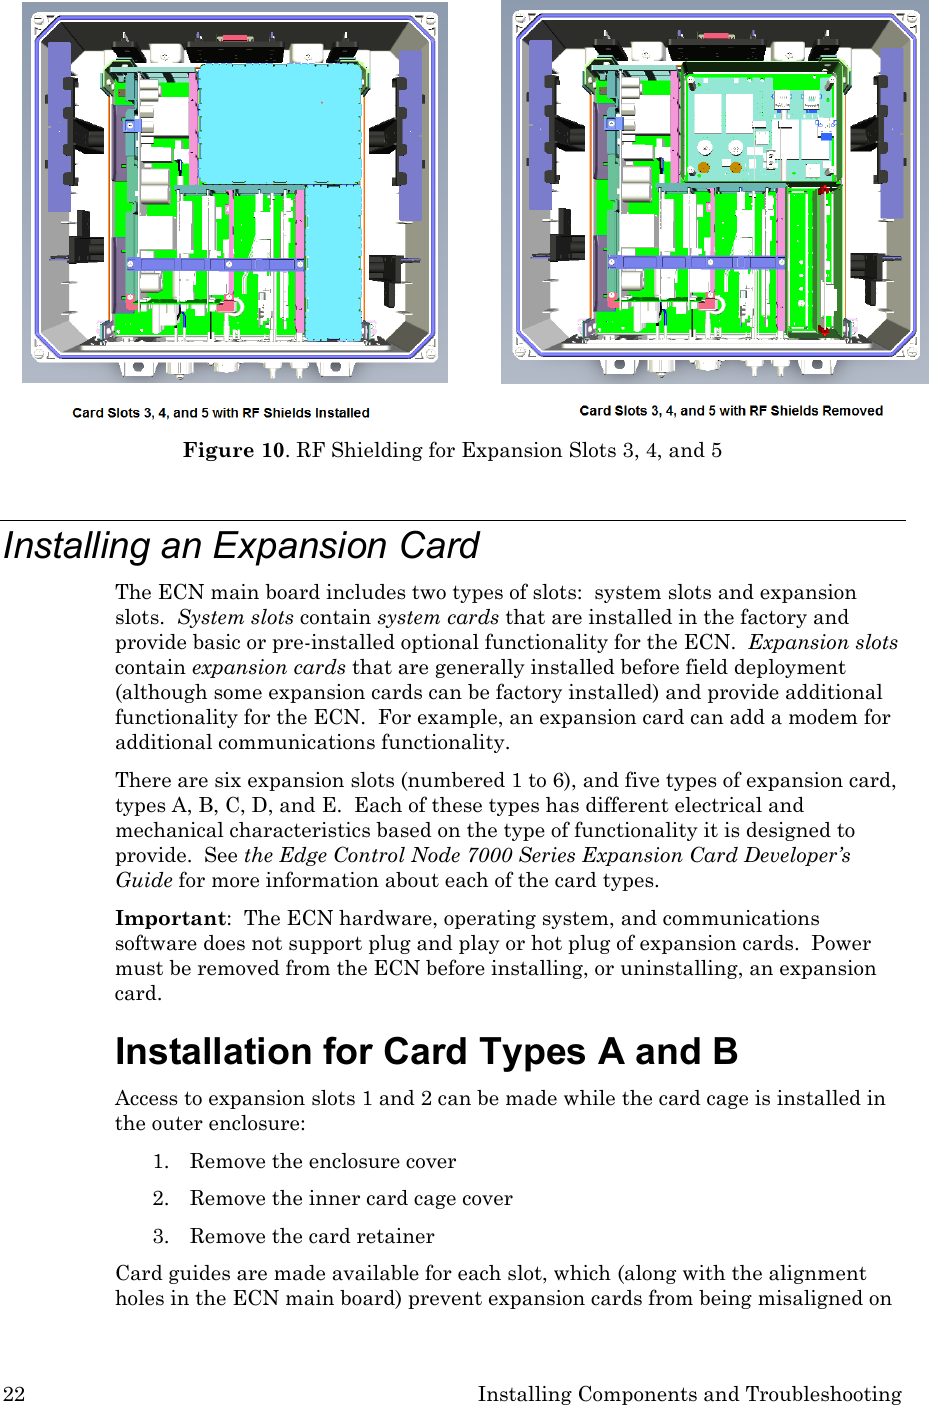 22 Installing Components and Troubleshooting  Figure 10. RF Shielding for Expansion Slots 3, 4, and 5  Installing an Expansion Card The ECN main board includes two types of slots:  system slots and expansion slots.  System slots contain system cards that are installed in the factory and provide basic or pre-installed optional functionality for the ECN.  Expansion slots contain expansion cards that are generally installed before field deployment (although some expansion cards can be factory installed) and provide additional functionality for the ECN.  For example, an expansion card can add a modem for additional communications functionality. There are six expansion slots (numbered 1 to 6), and five types of expansion card, types A, B, C, D, and E.  Each of these types has different electrical and mechanical characteristics based on the type of functionality it is designed to provide.  See the Edge Control Node 7000 Series Expansion Card Developer’s Guide for more information about each of the card types. Important:  The ECN hardware, operating system, and communications software does not support plug and play or hot plug of expansion cards.  Power must be removed from the ECN before installing, or uninstalling, an expansion card. Installation for Card Types A and B Access to expansion slots 1 and 2 can be made while the card cage is installed in the outer enclosure: 1. Remove the enclosure cover 2. Remove the inner card cage cover 3. Remove the card retainer  Card guides are made available for each slot, which (along with the alignment holes in the ECN main board) prevent expansion cards from being misaligned on 